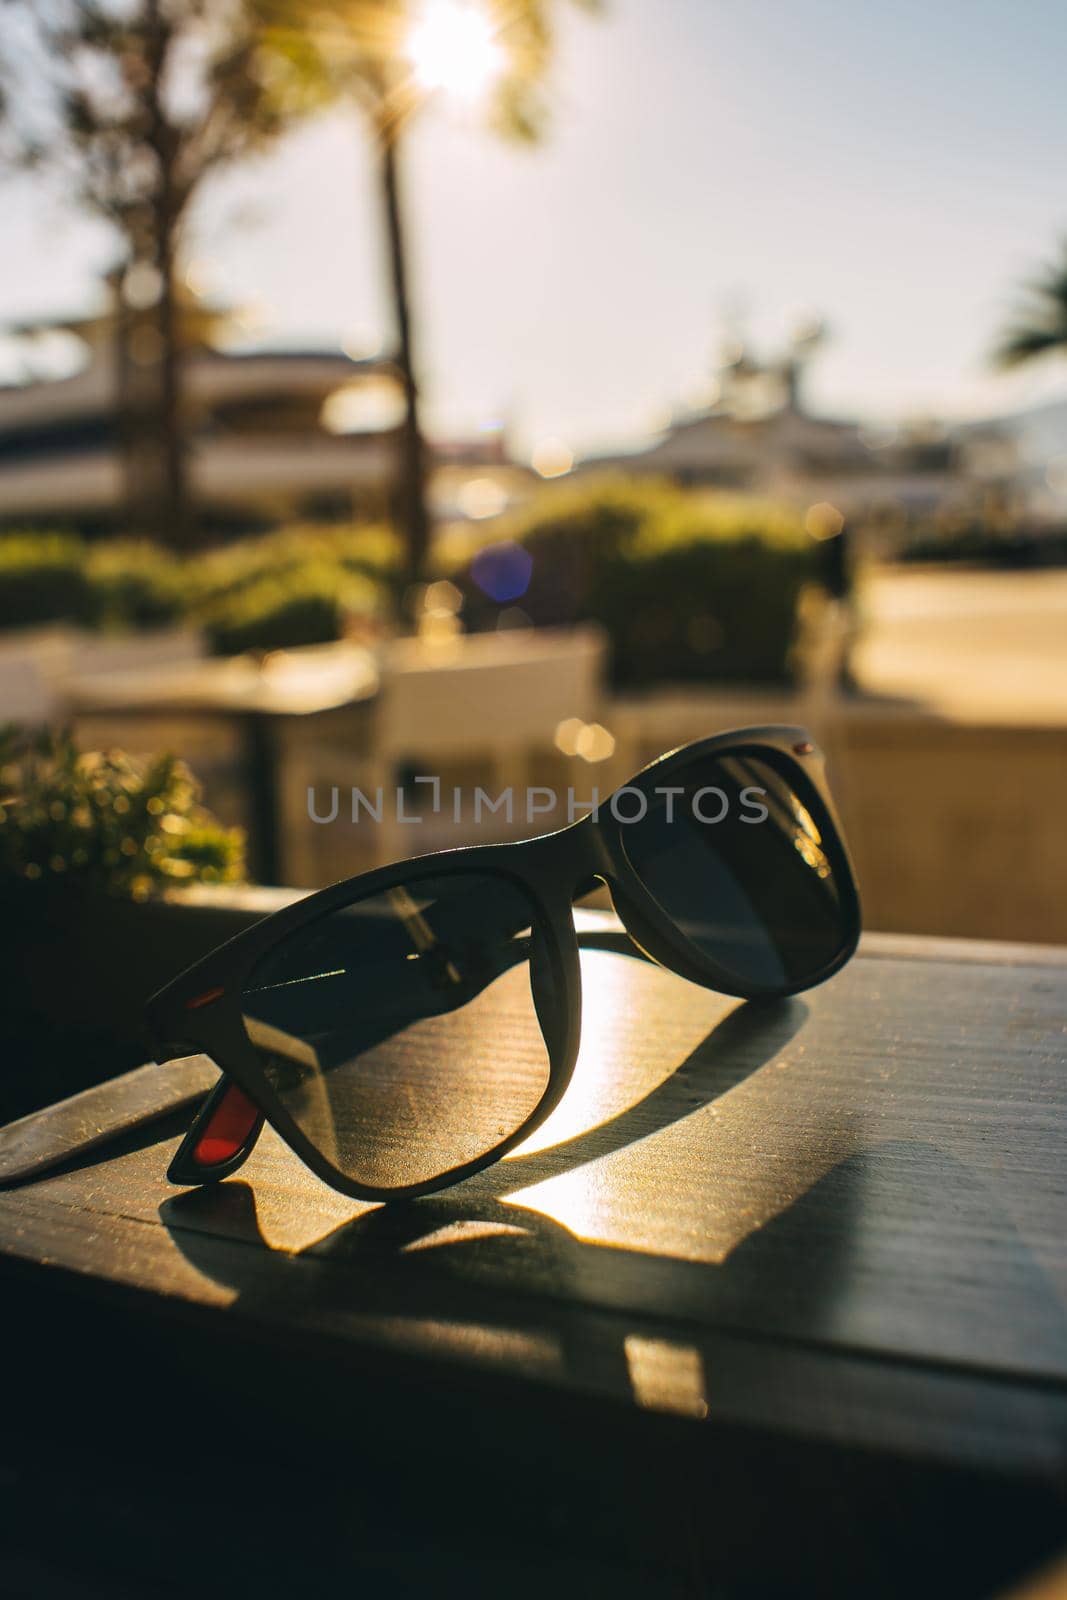 Sunglasses on wood table in the sun wallpaper on the desktop. High quality photo